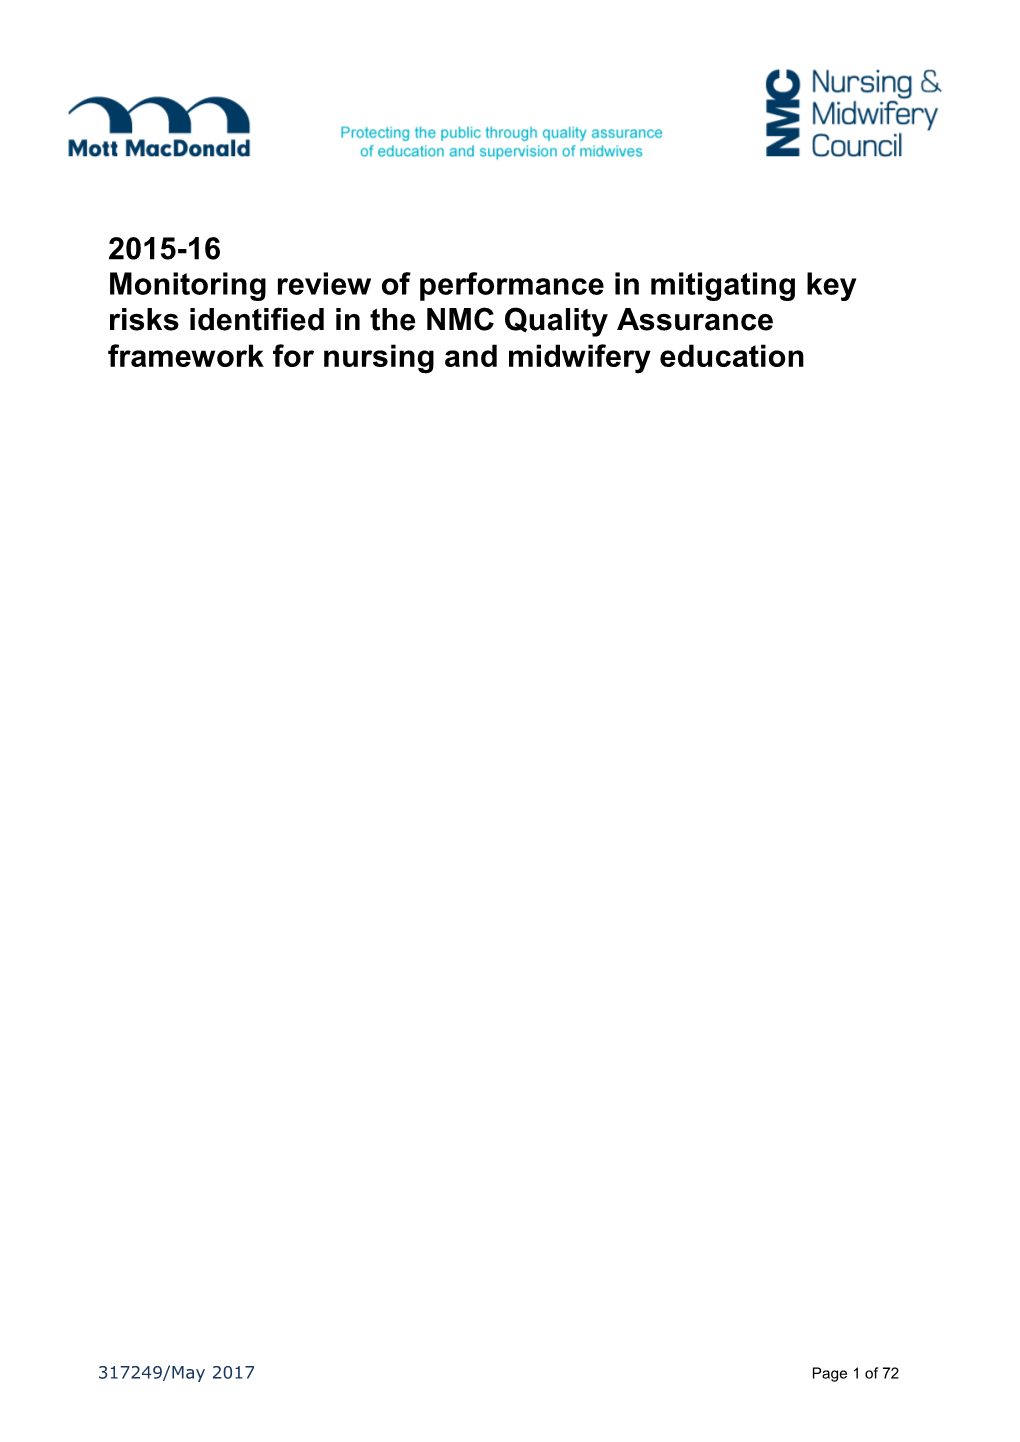 2015-16 Monitoring Review of Performance in Mitigating Key Risks